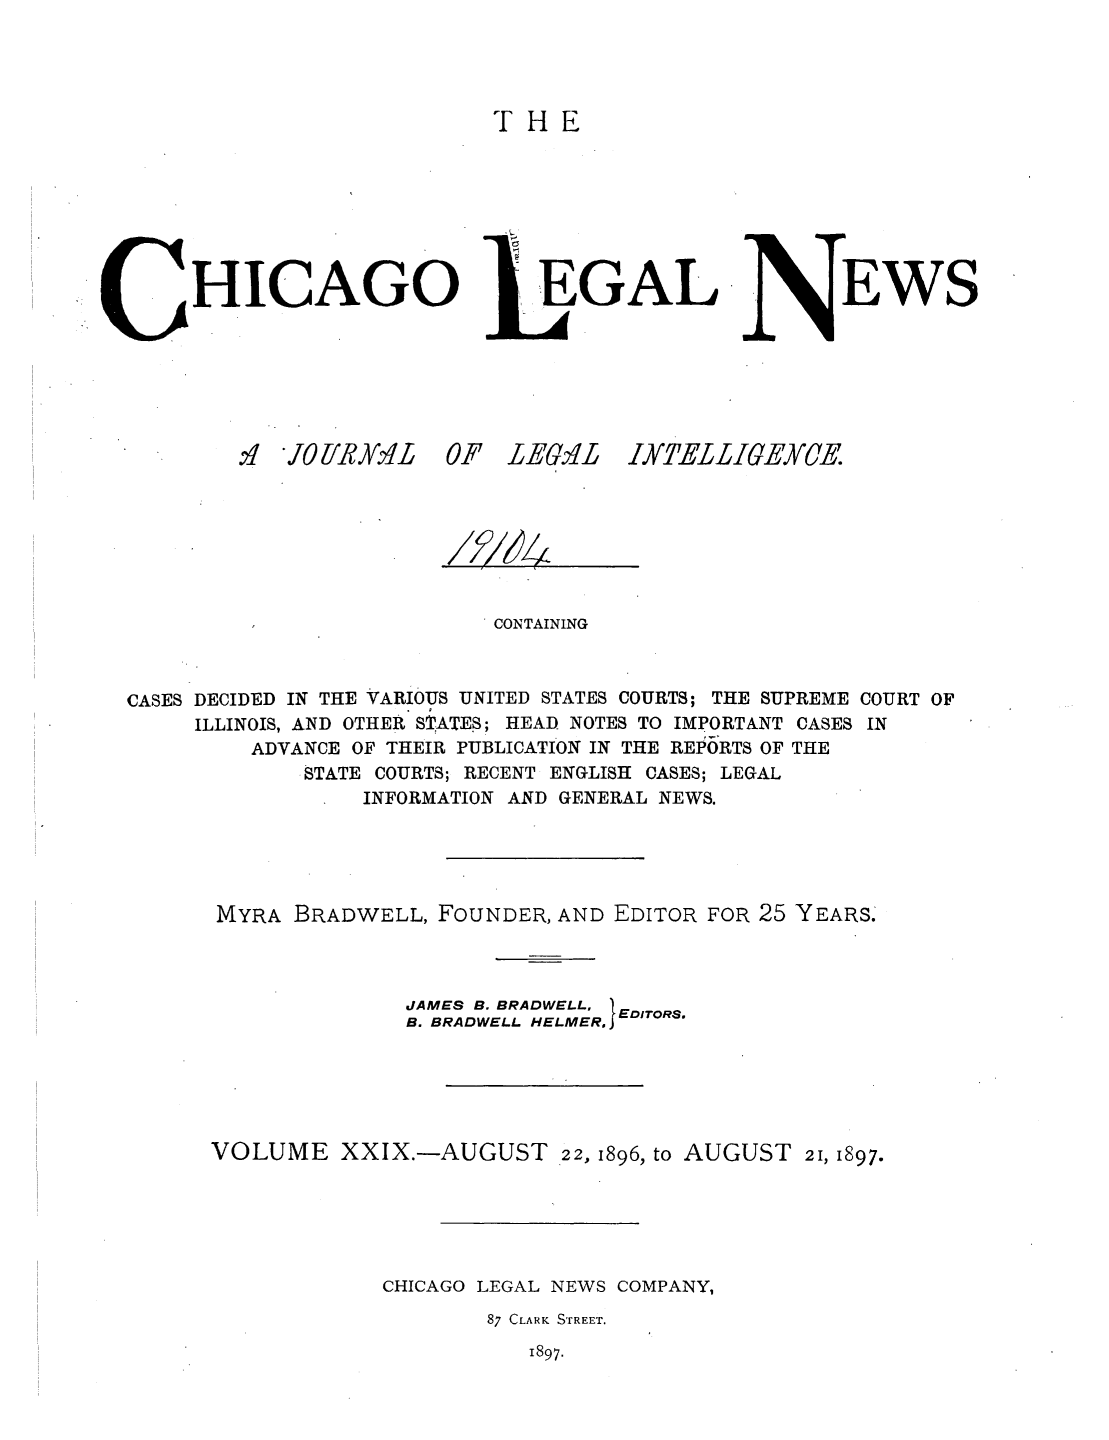 handle is hein.journals/chiclene29 and id is 1 raw text is: THEHICAGO.H JOliR]K L 0.EGALAF L-ELBEWSCONTAININGCASES DECIDED IN THE VARIOUS UNITED STATES COURTS; THE SUPREME COURT OFILLINOIS, AND OTHER STATES; HEAD NOTES TO IMPORTANT CASES INADVANCE OF THEIR PUBLICATION IN THE REPORTS OF THESTATE COURTS; RECENT ENGLISH CASES; LEGALINFORMATION AND GENERAL NEWS.MYRA BRADWELL, FOUNDER, AND EDITOR FOR 25 YEARS.JAMES B. BRADWELL, B. BRADWELL HELMER.1 EDITORSVOLUME XXIX.-AUGUST 22, 1896, to AUGUST 21, 1897.CHICAGO LEGAL NEWS COMPANY,87 CLARK STREET.1897.LYTELLIGEYCEIMIX4